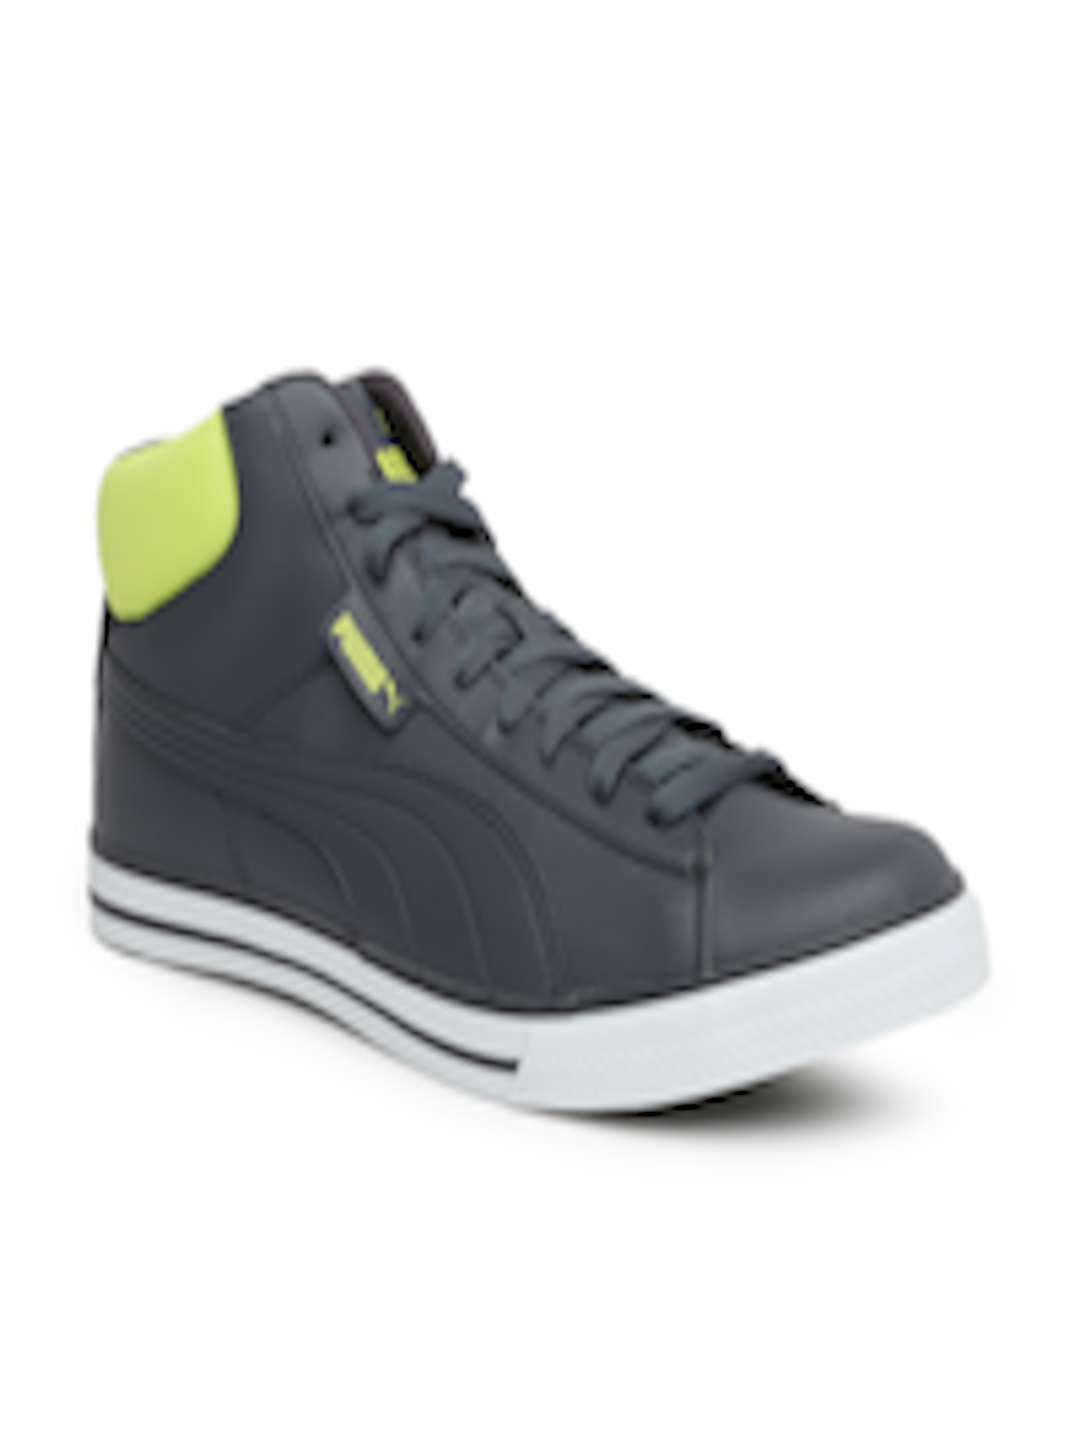 Buy PUMA Unisex Grey Sneakers - Casual Shoes for Unisex 1408307 | Myntra